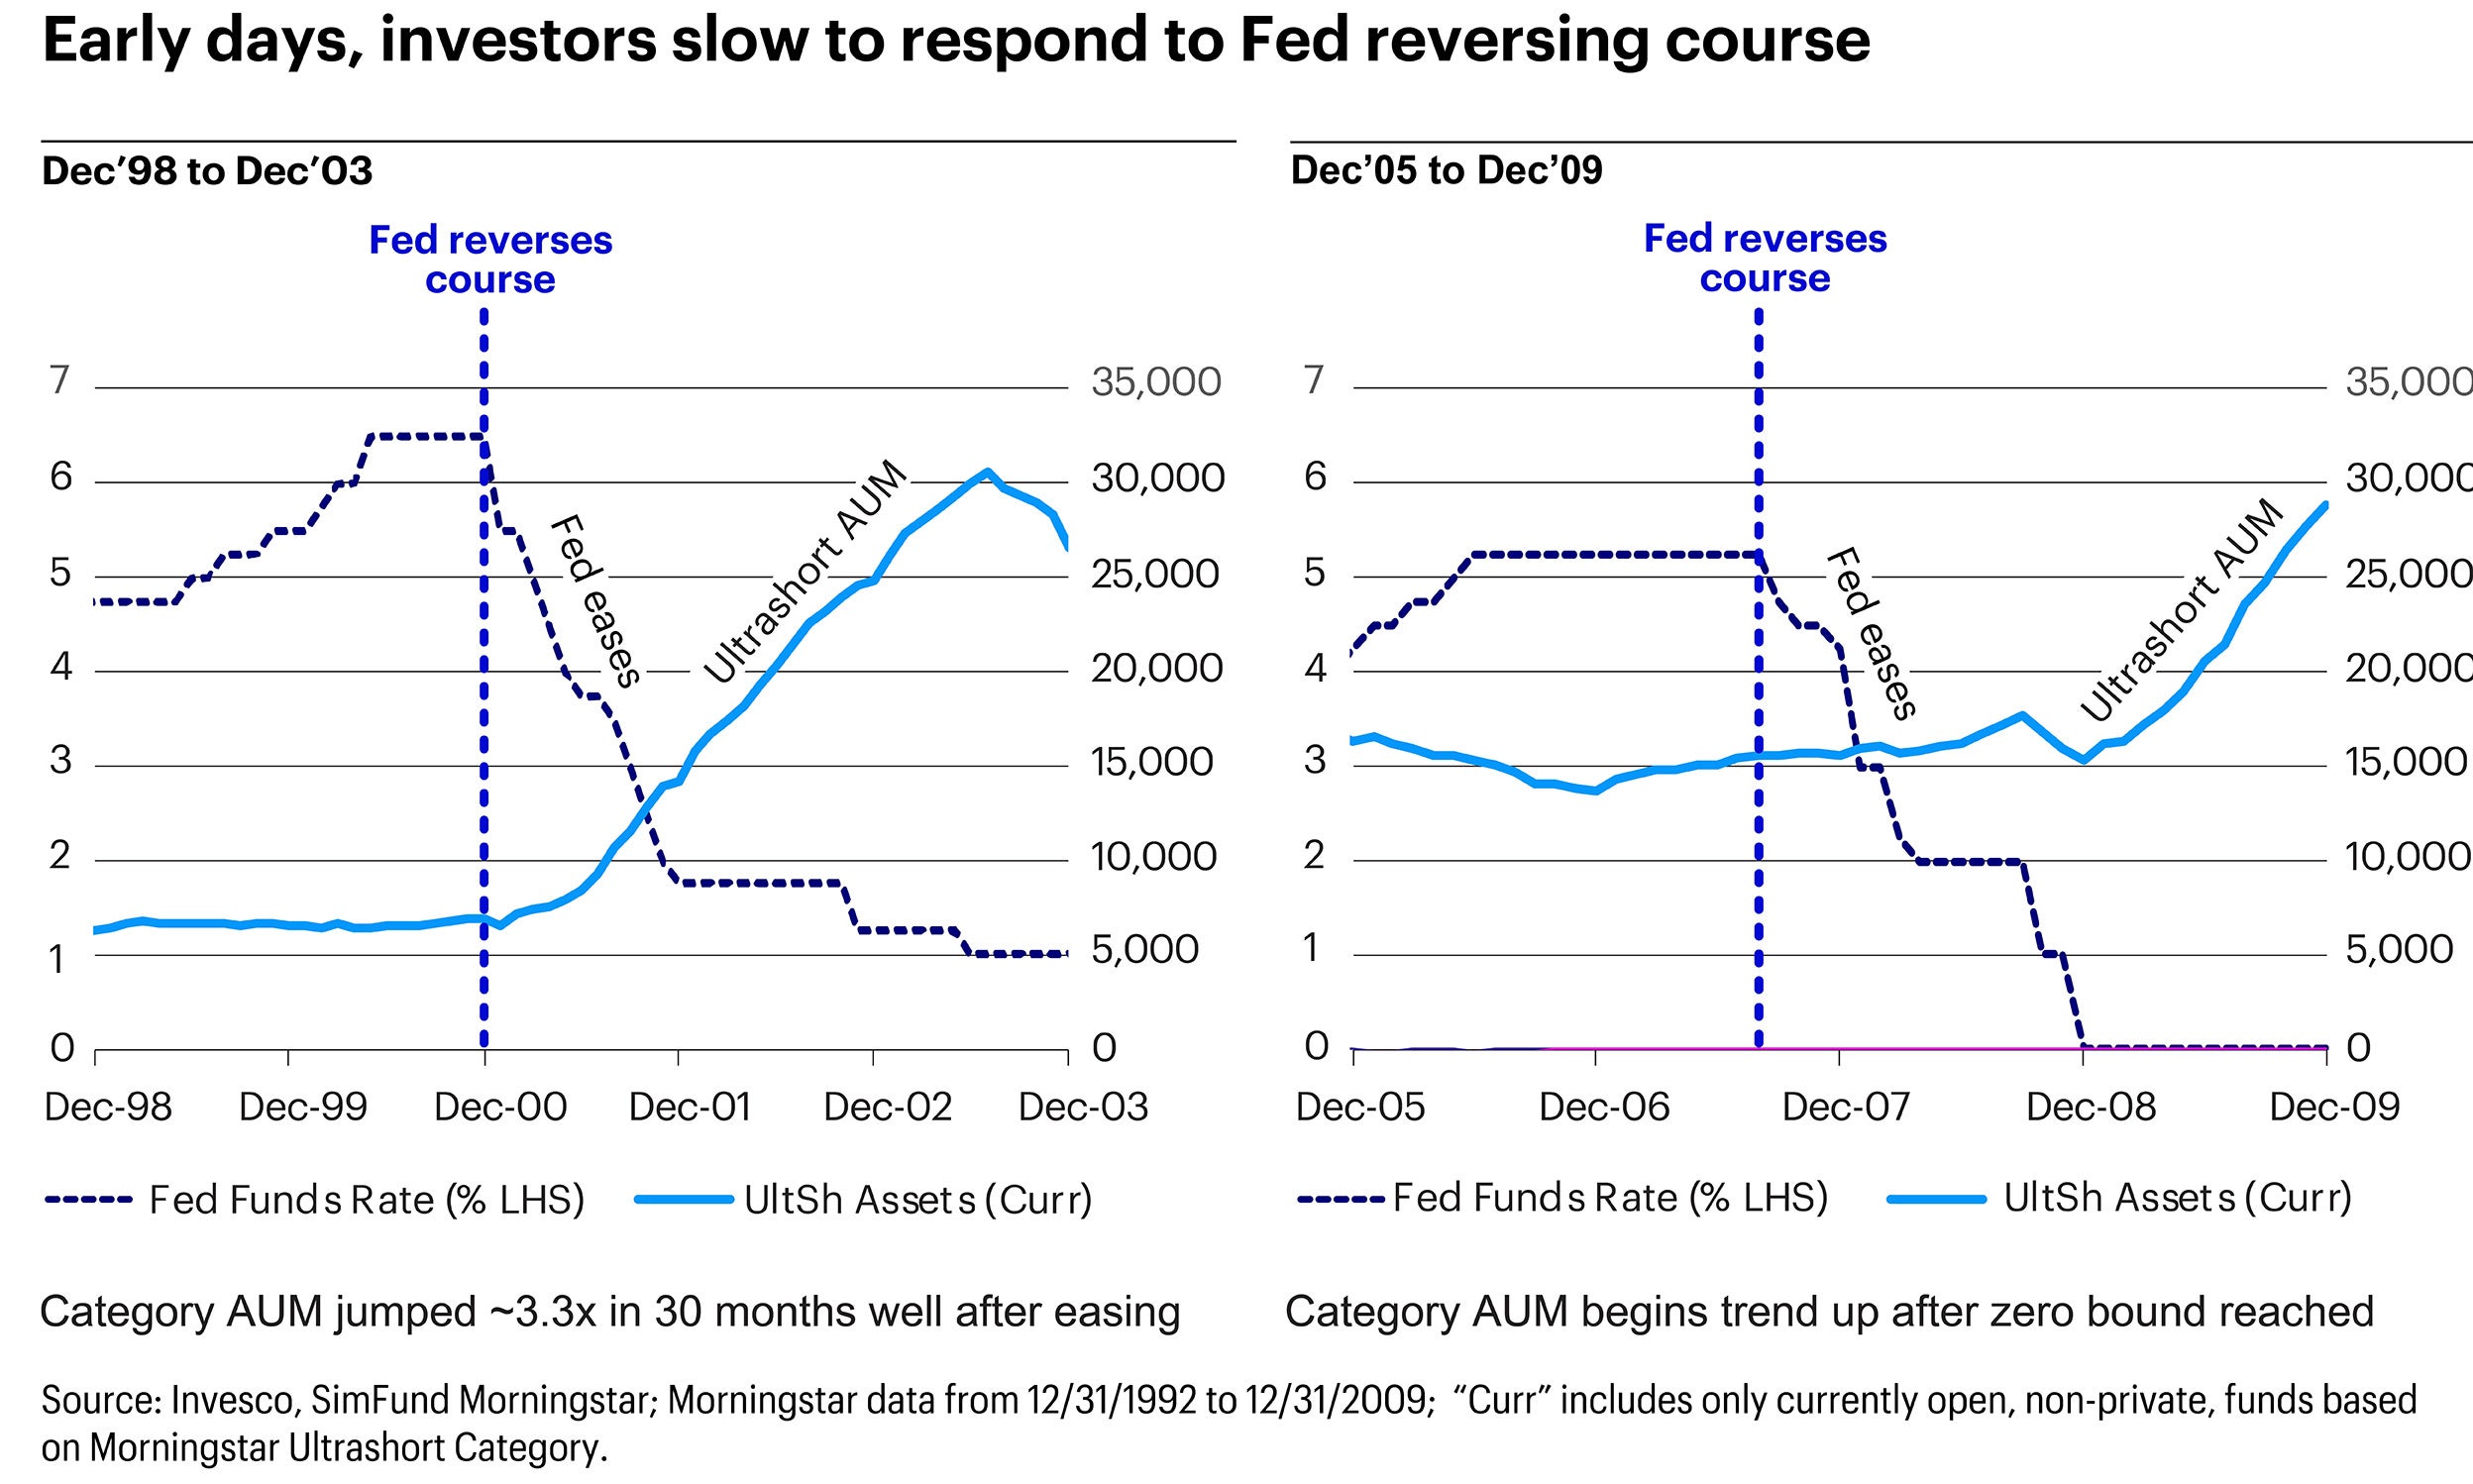 a.	This chart shows that historically, investors in ultrashort strategies have been slow to respond to Fed easing, waiting until their cash-based yields are notably lower than ultrashort yields